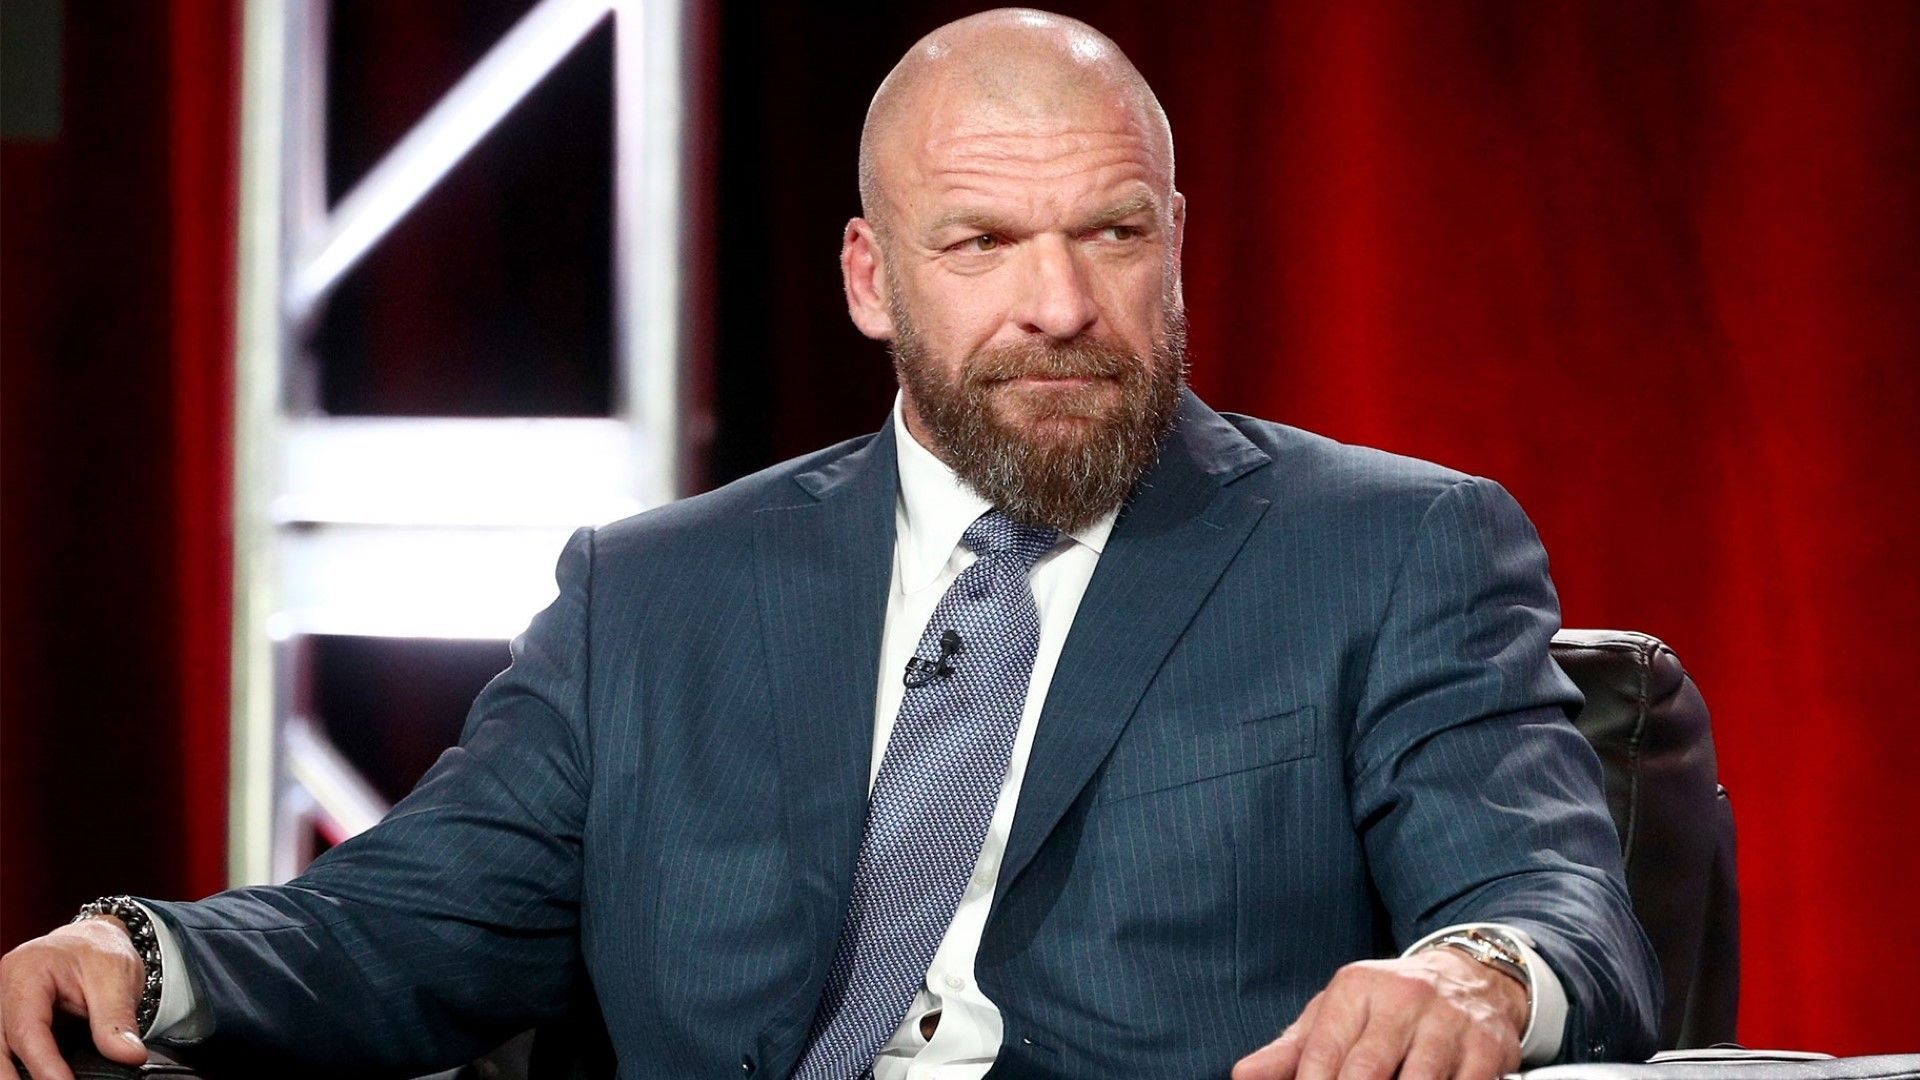 WWE Chief Content Officer Triple H has signed another top talent